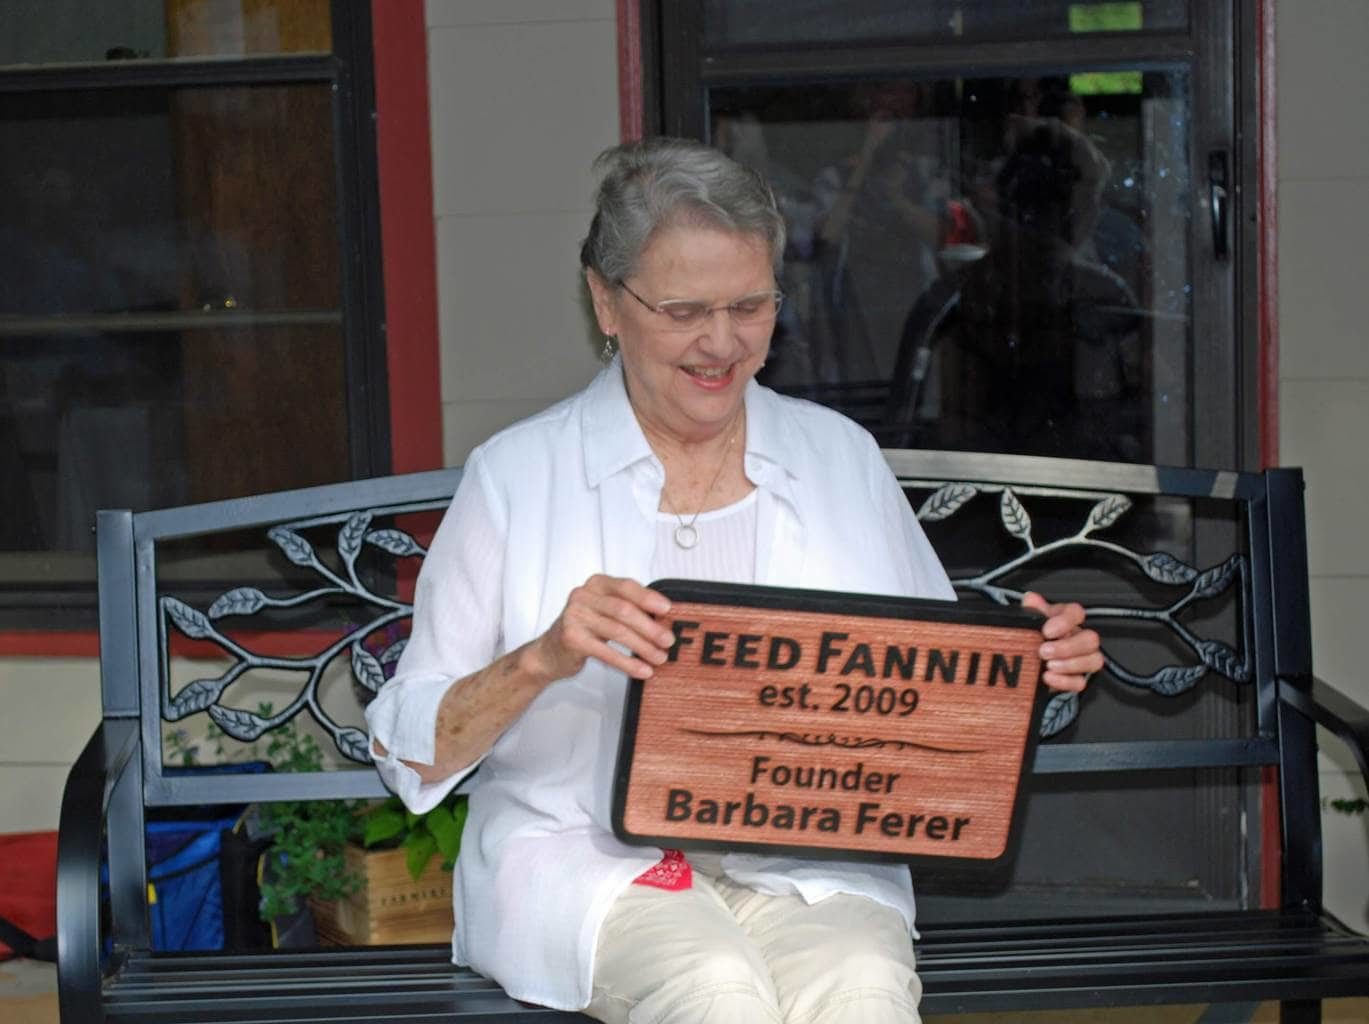 Feed Fannin founder Barbara Ferer smiling, holding a plaque with her name on it.